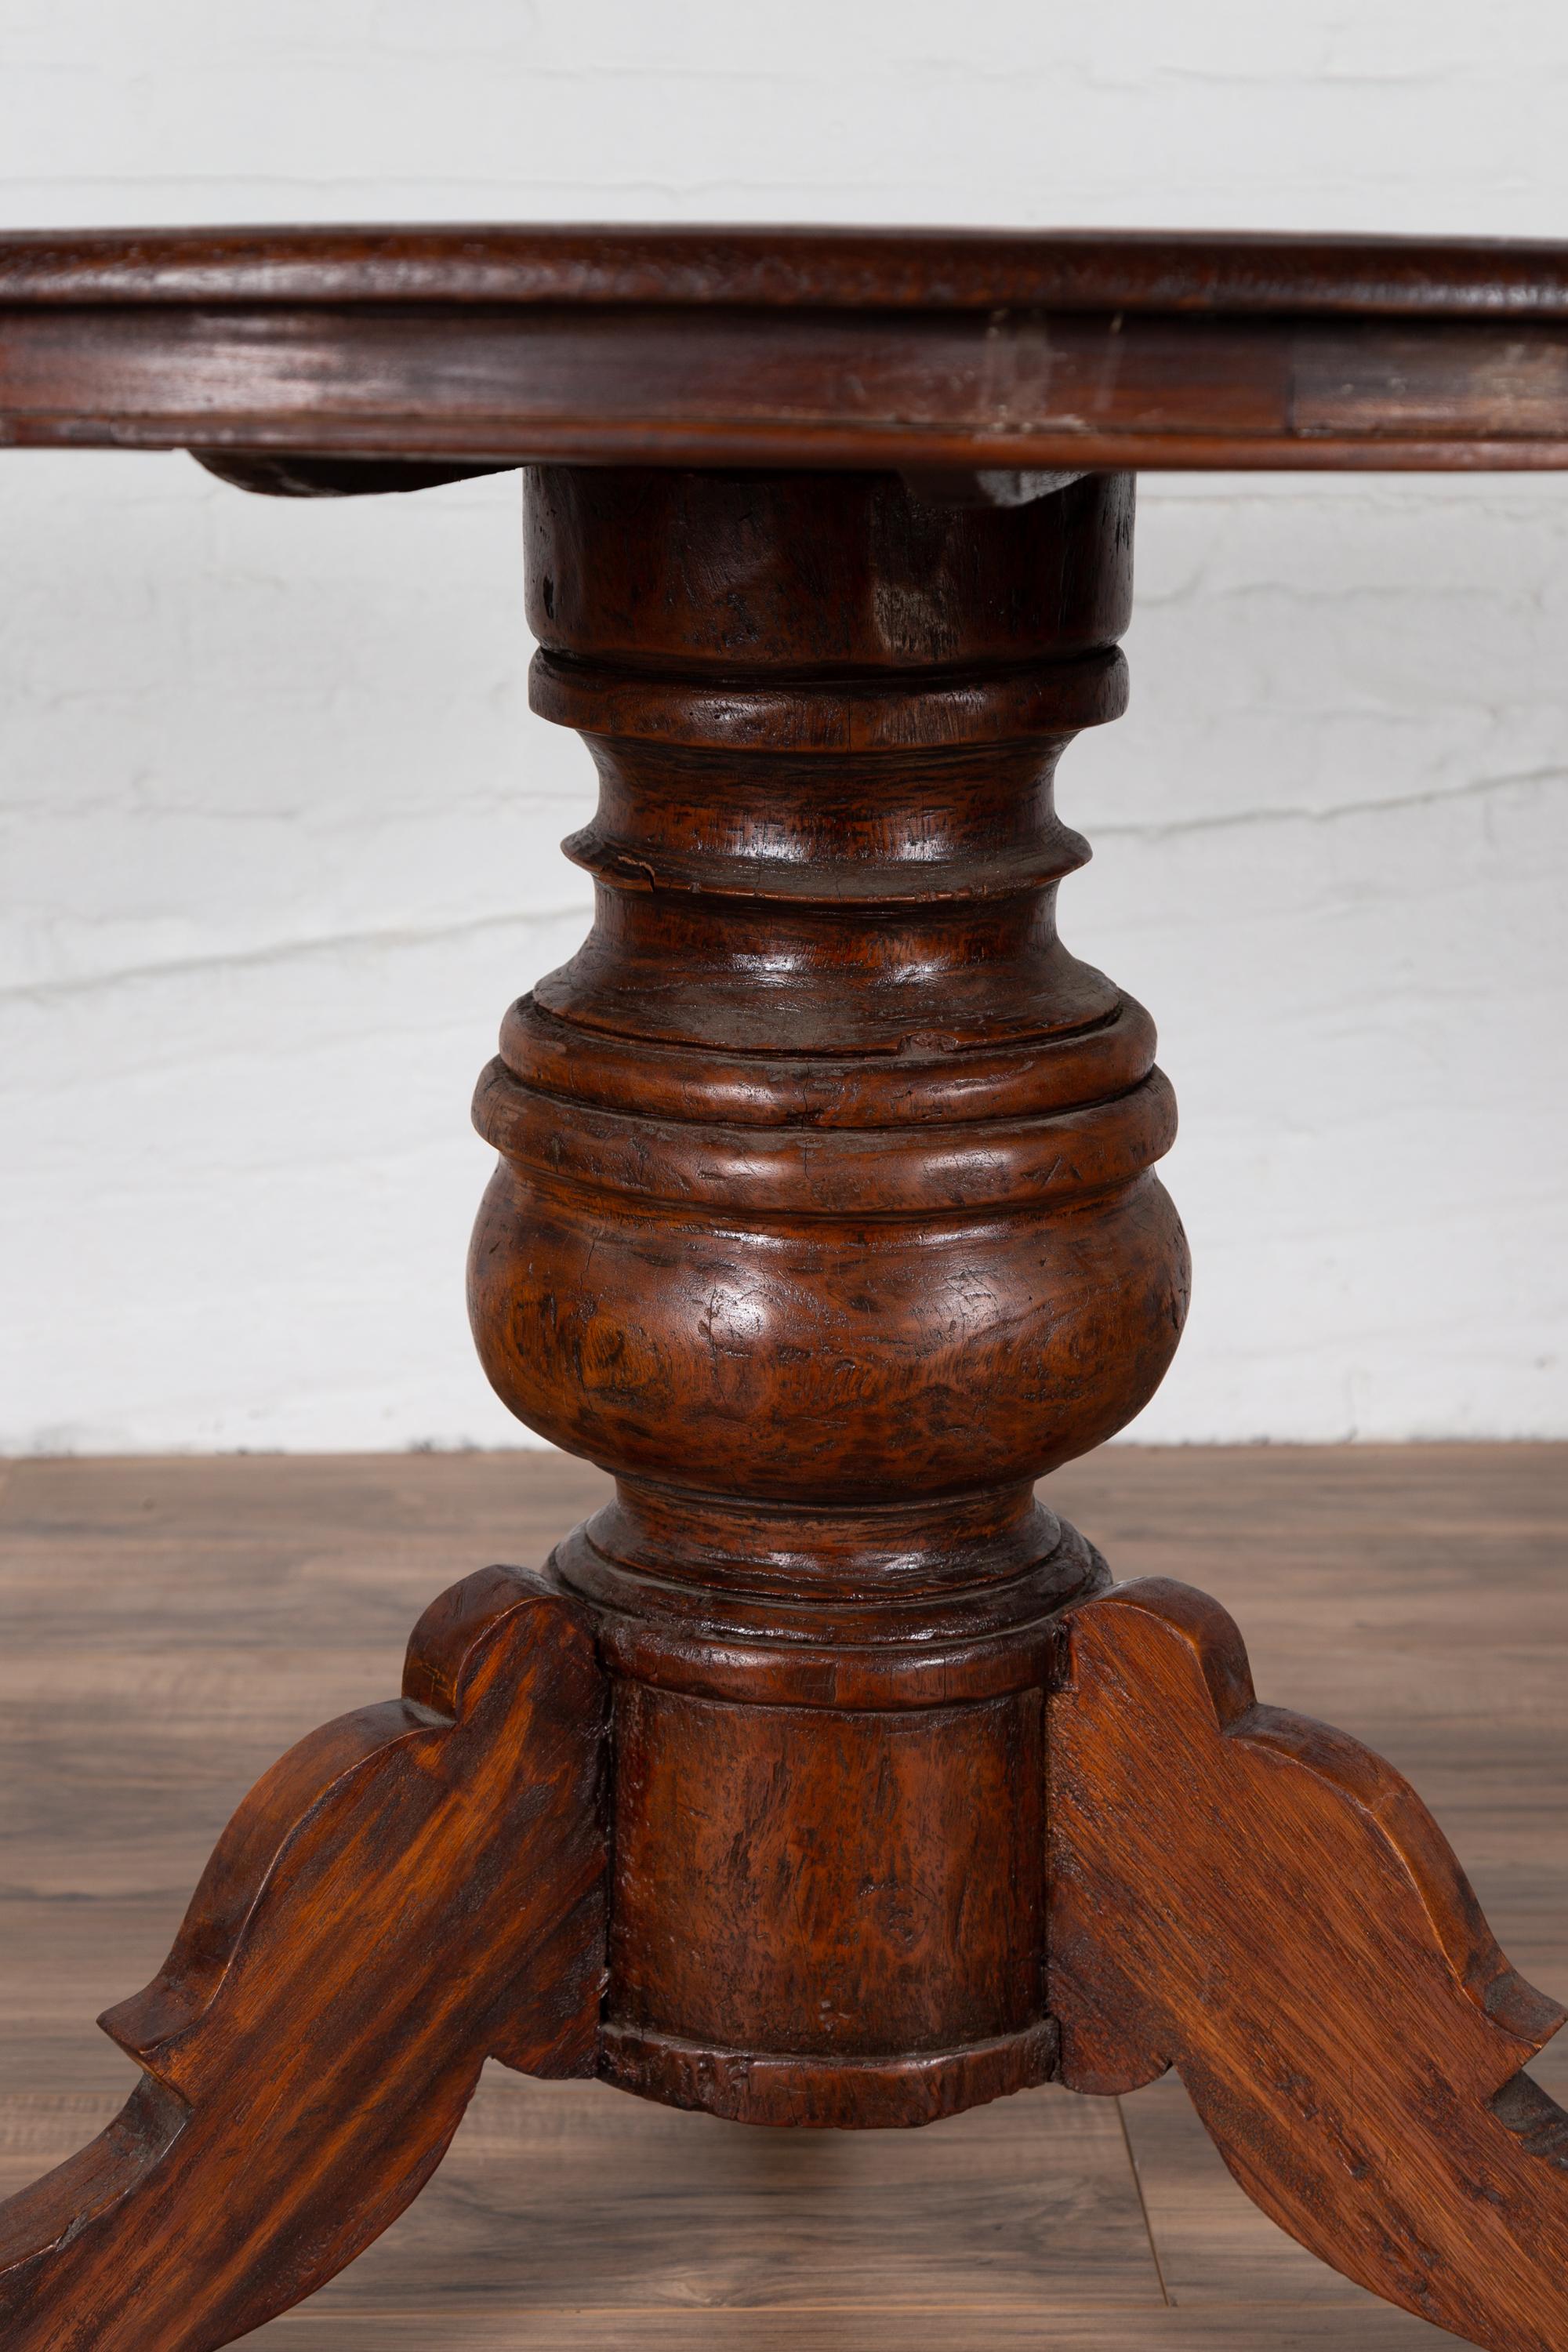 Wood Dutch Colonial Javanese Pedestal Tripod Table with Circular Top and Turned Base